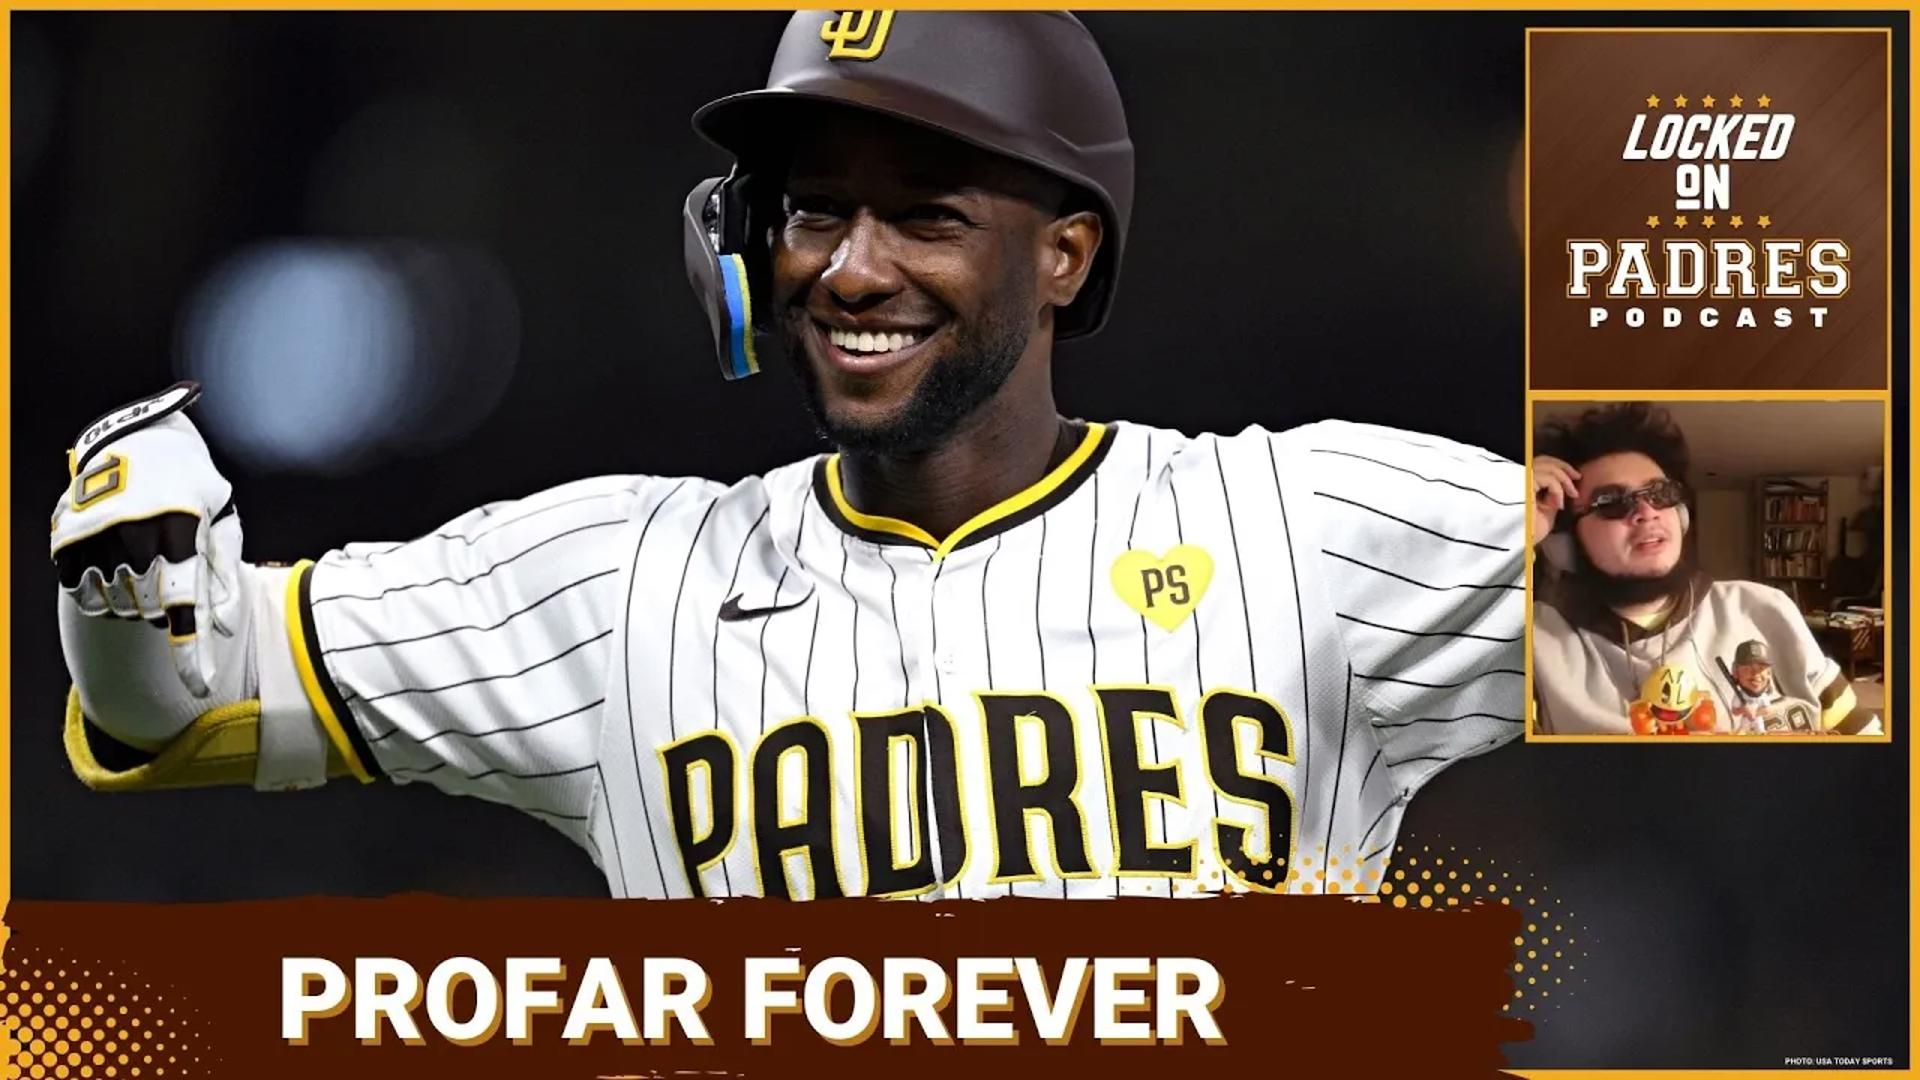 On today's episode, Javier is recapping the San Diego Padres  drama-filled game against the Nationals in which Jurickson Profar ascended to god tier.